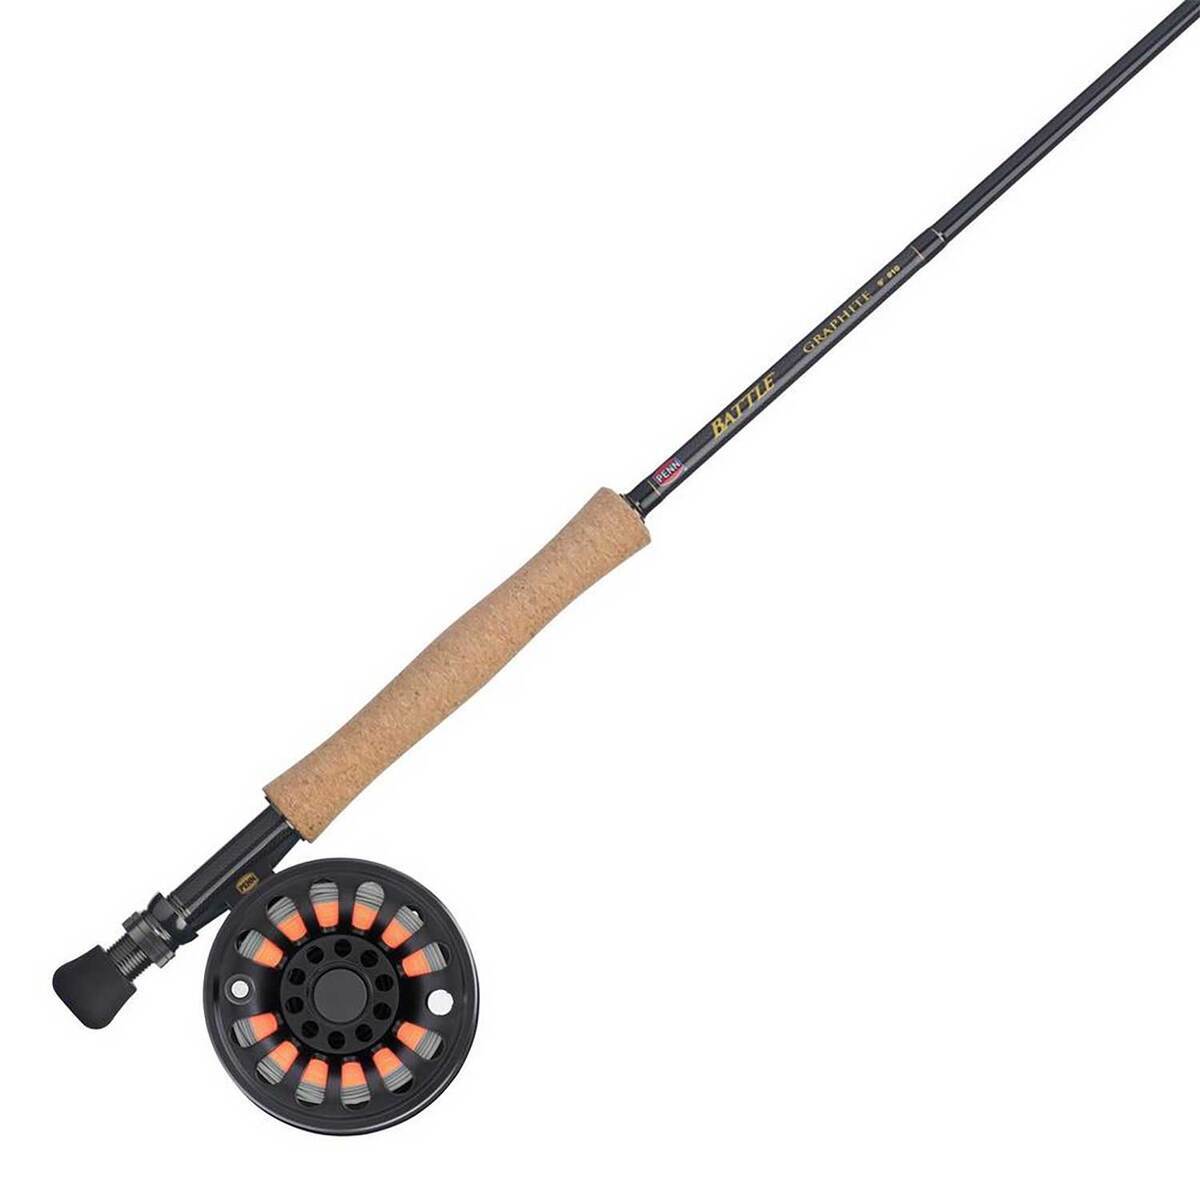 TFO Bug Launcher Outfit Rod/Reel Combo